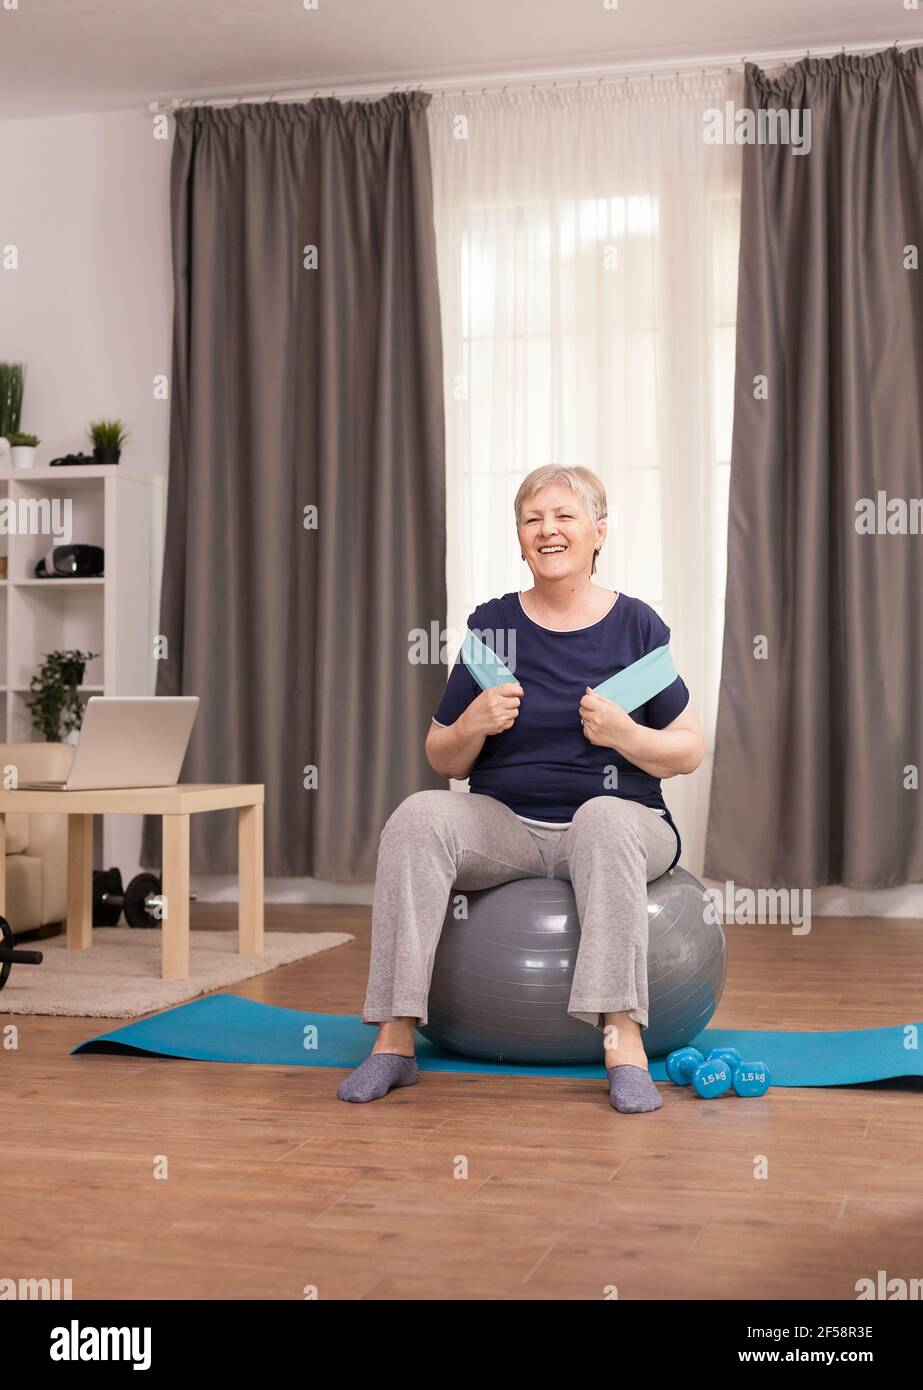 Healthy senior woman using resistance band for vitality. Old person pensioner online internet exercise training at home sport activity with dumbbell, swiss ball at elderly retirement age Stock Photo